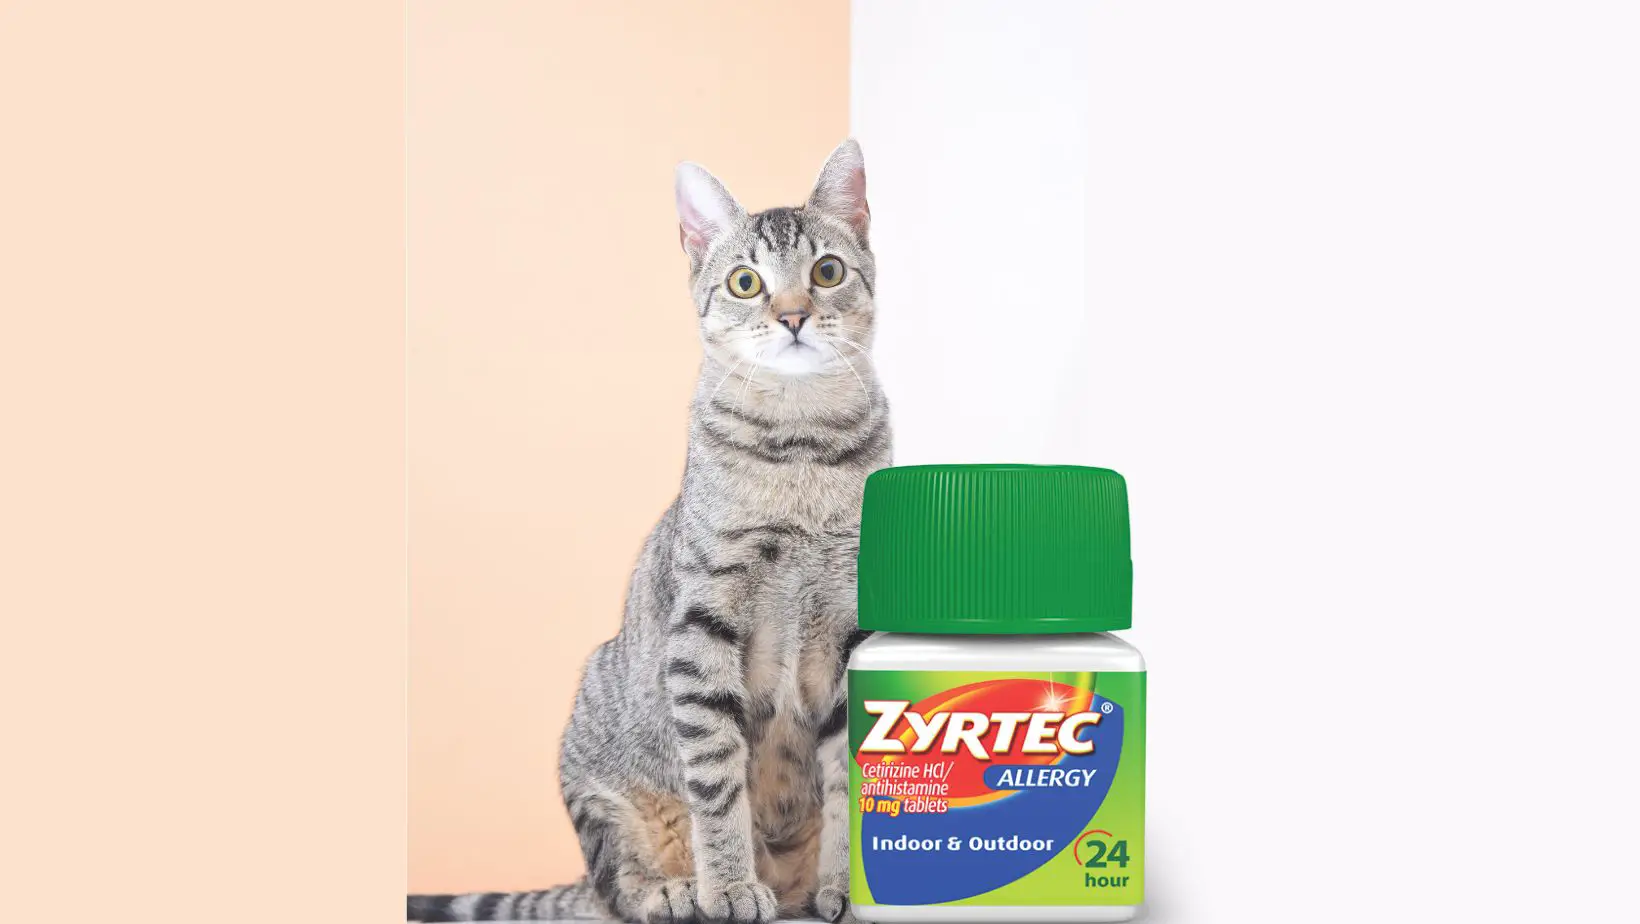 Can I Give a Cat Zyrtec?